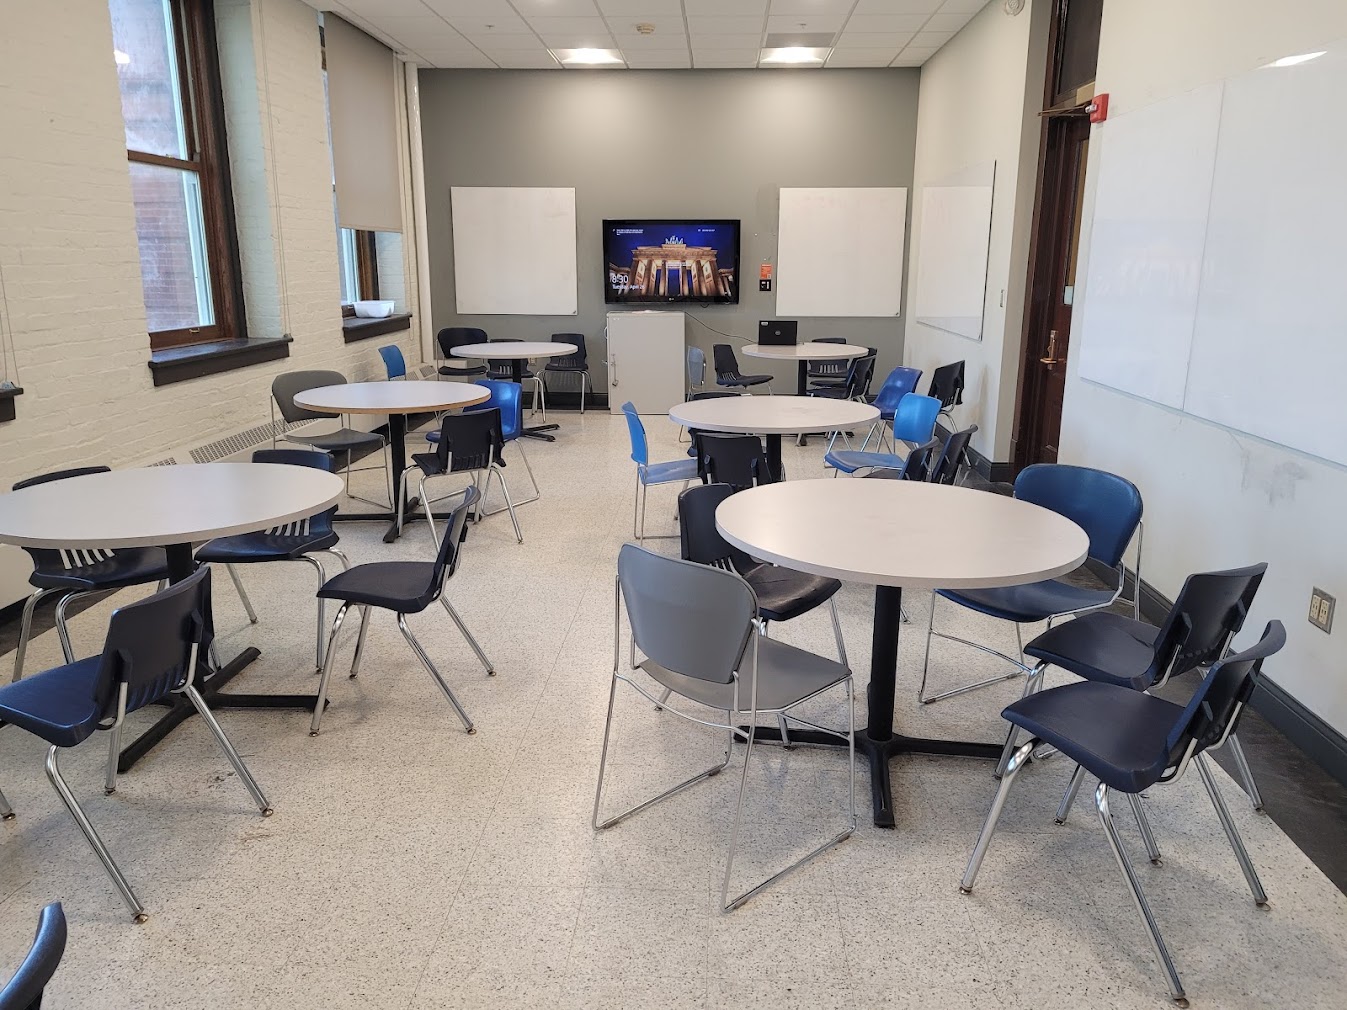 This is a view of the room with student desks, a LCD monitor, and white boards